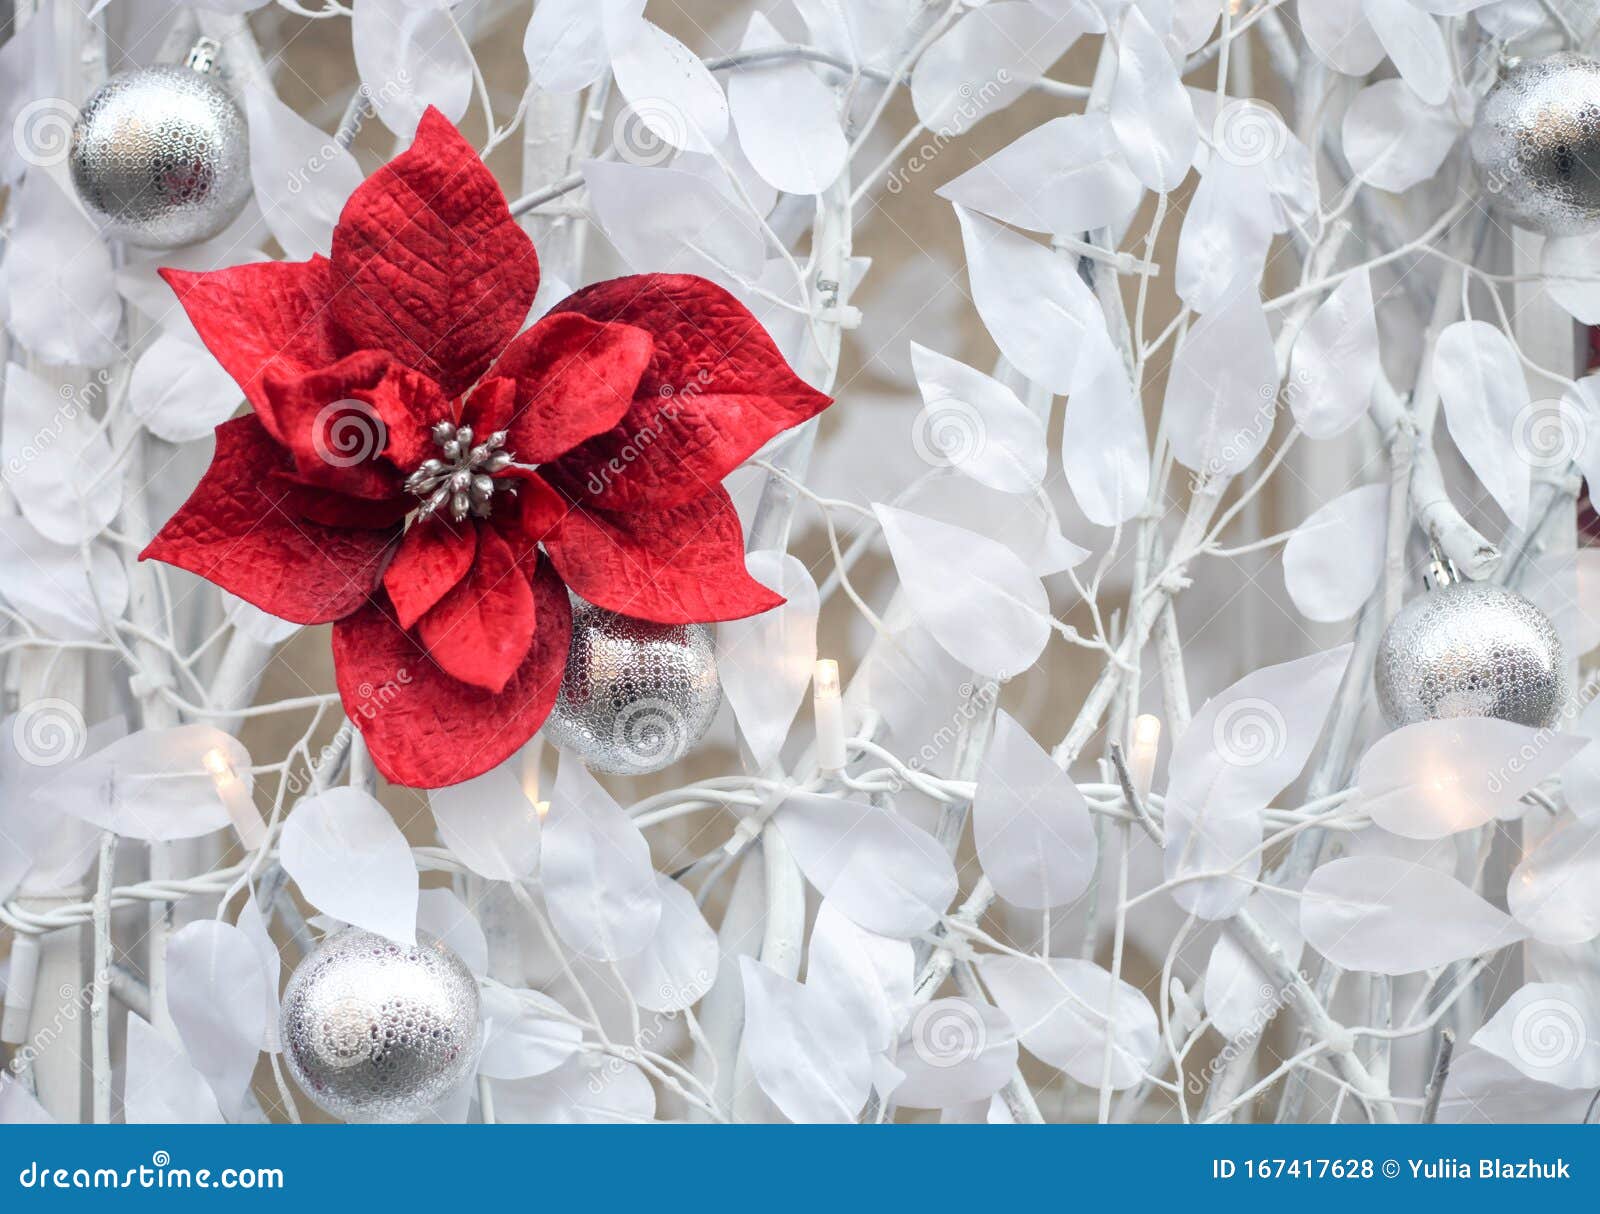 Christmas Decoration White Leaves And Red Flowers Silver And White Decor Stock Photo Image Of Border Ornate